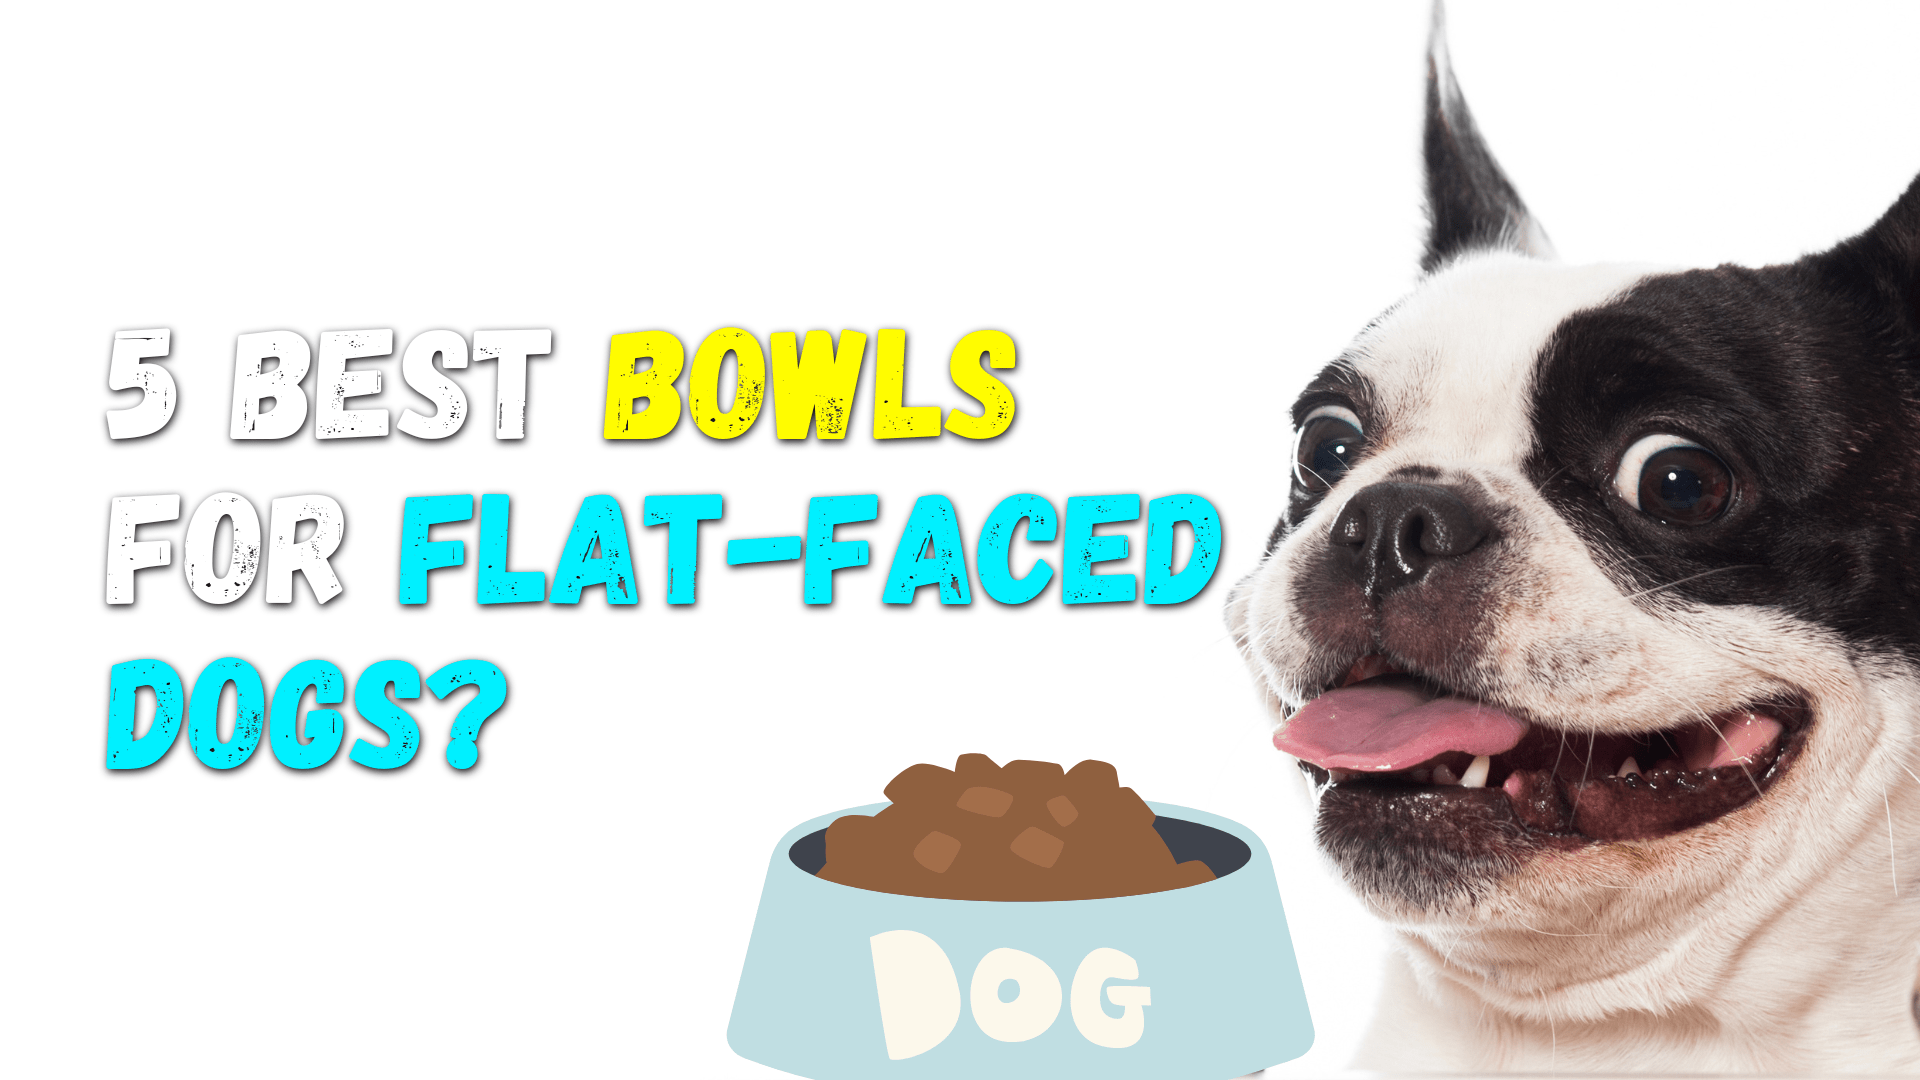 5 Best Dog Bowls For Flat-Faced Dogs (Complete 2022 Guide)